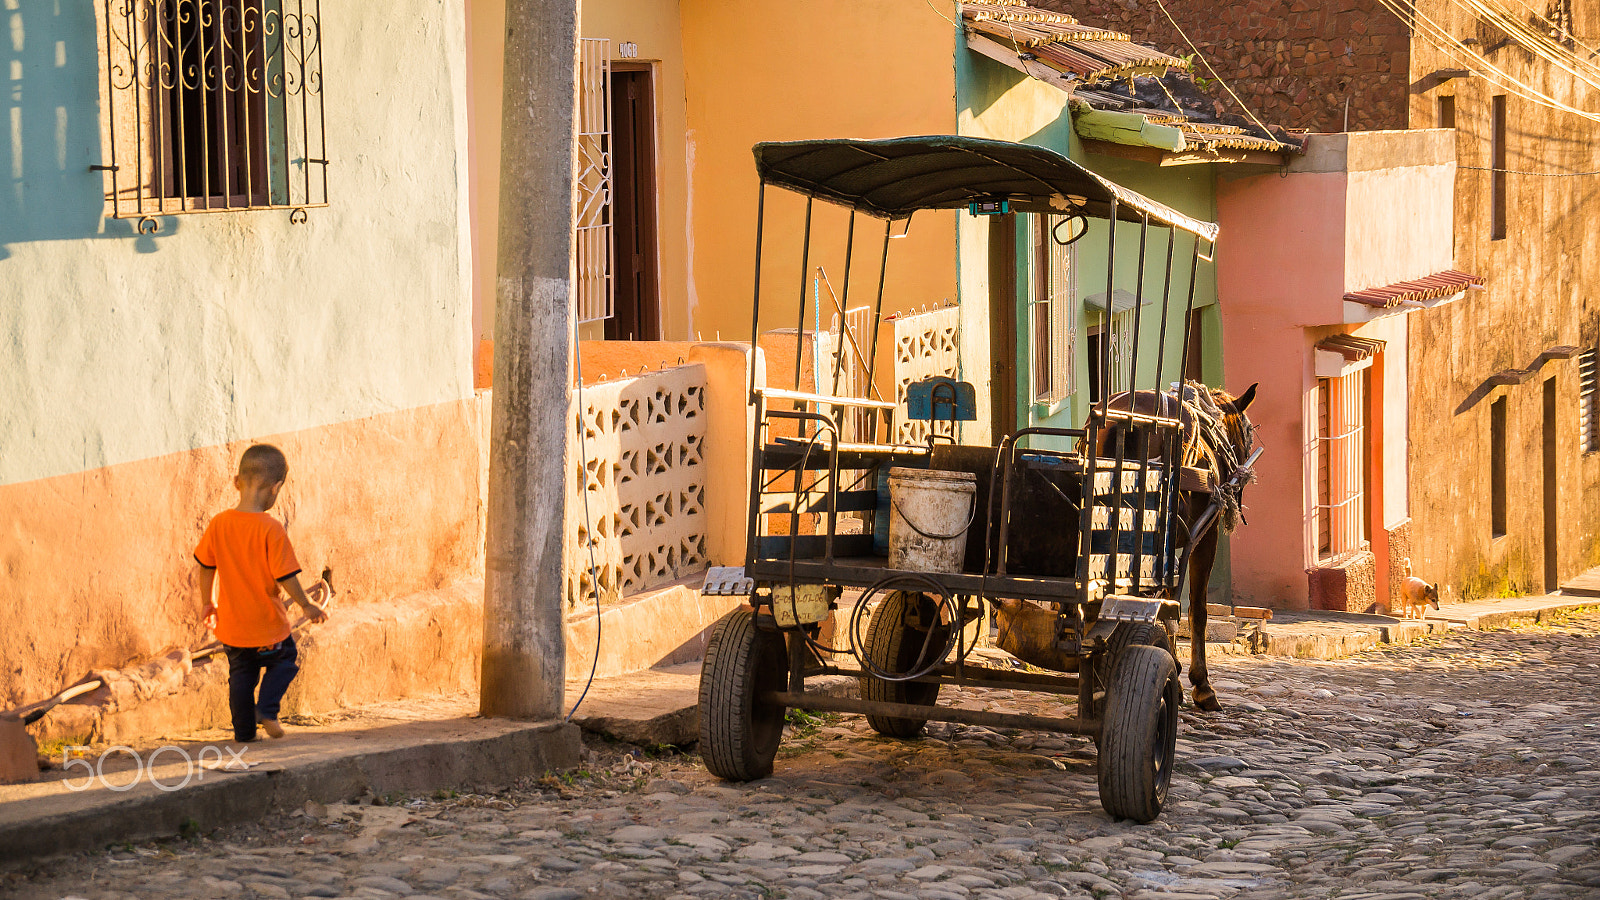 Sony SLT-A37 sample photo. Horse carriage on streetside in trinidad, cuba at sunset photography